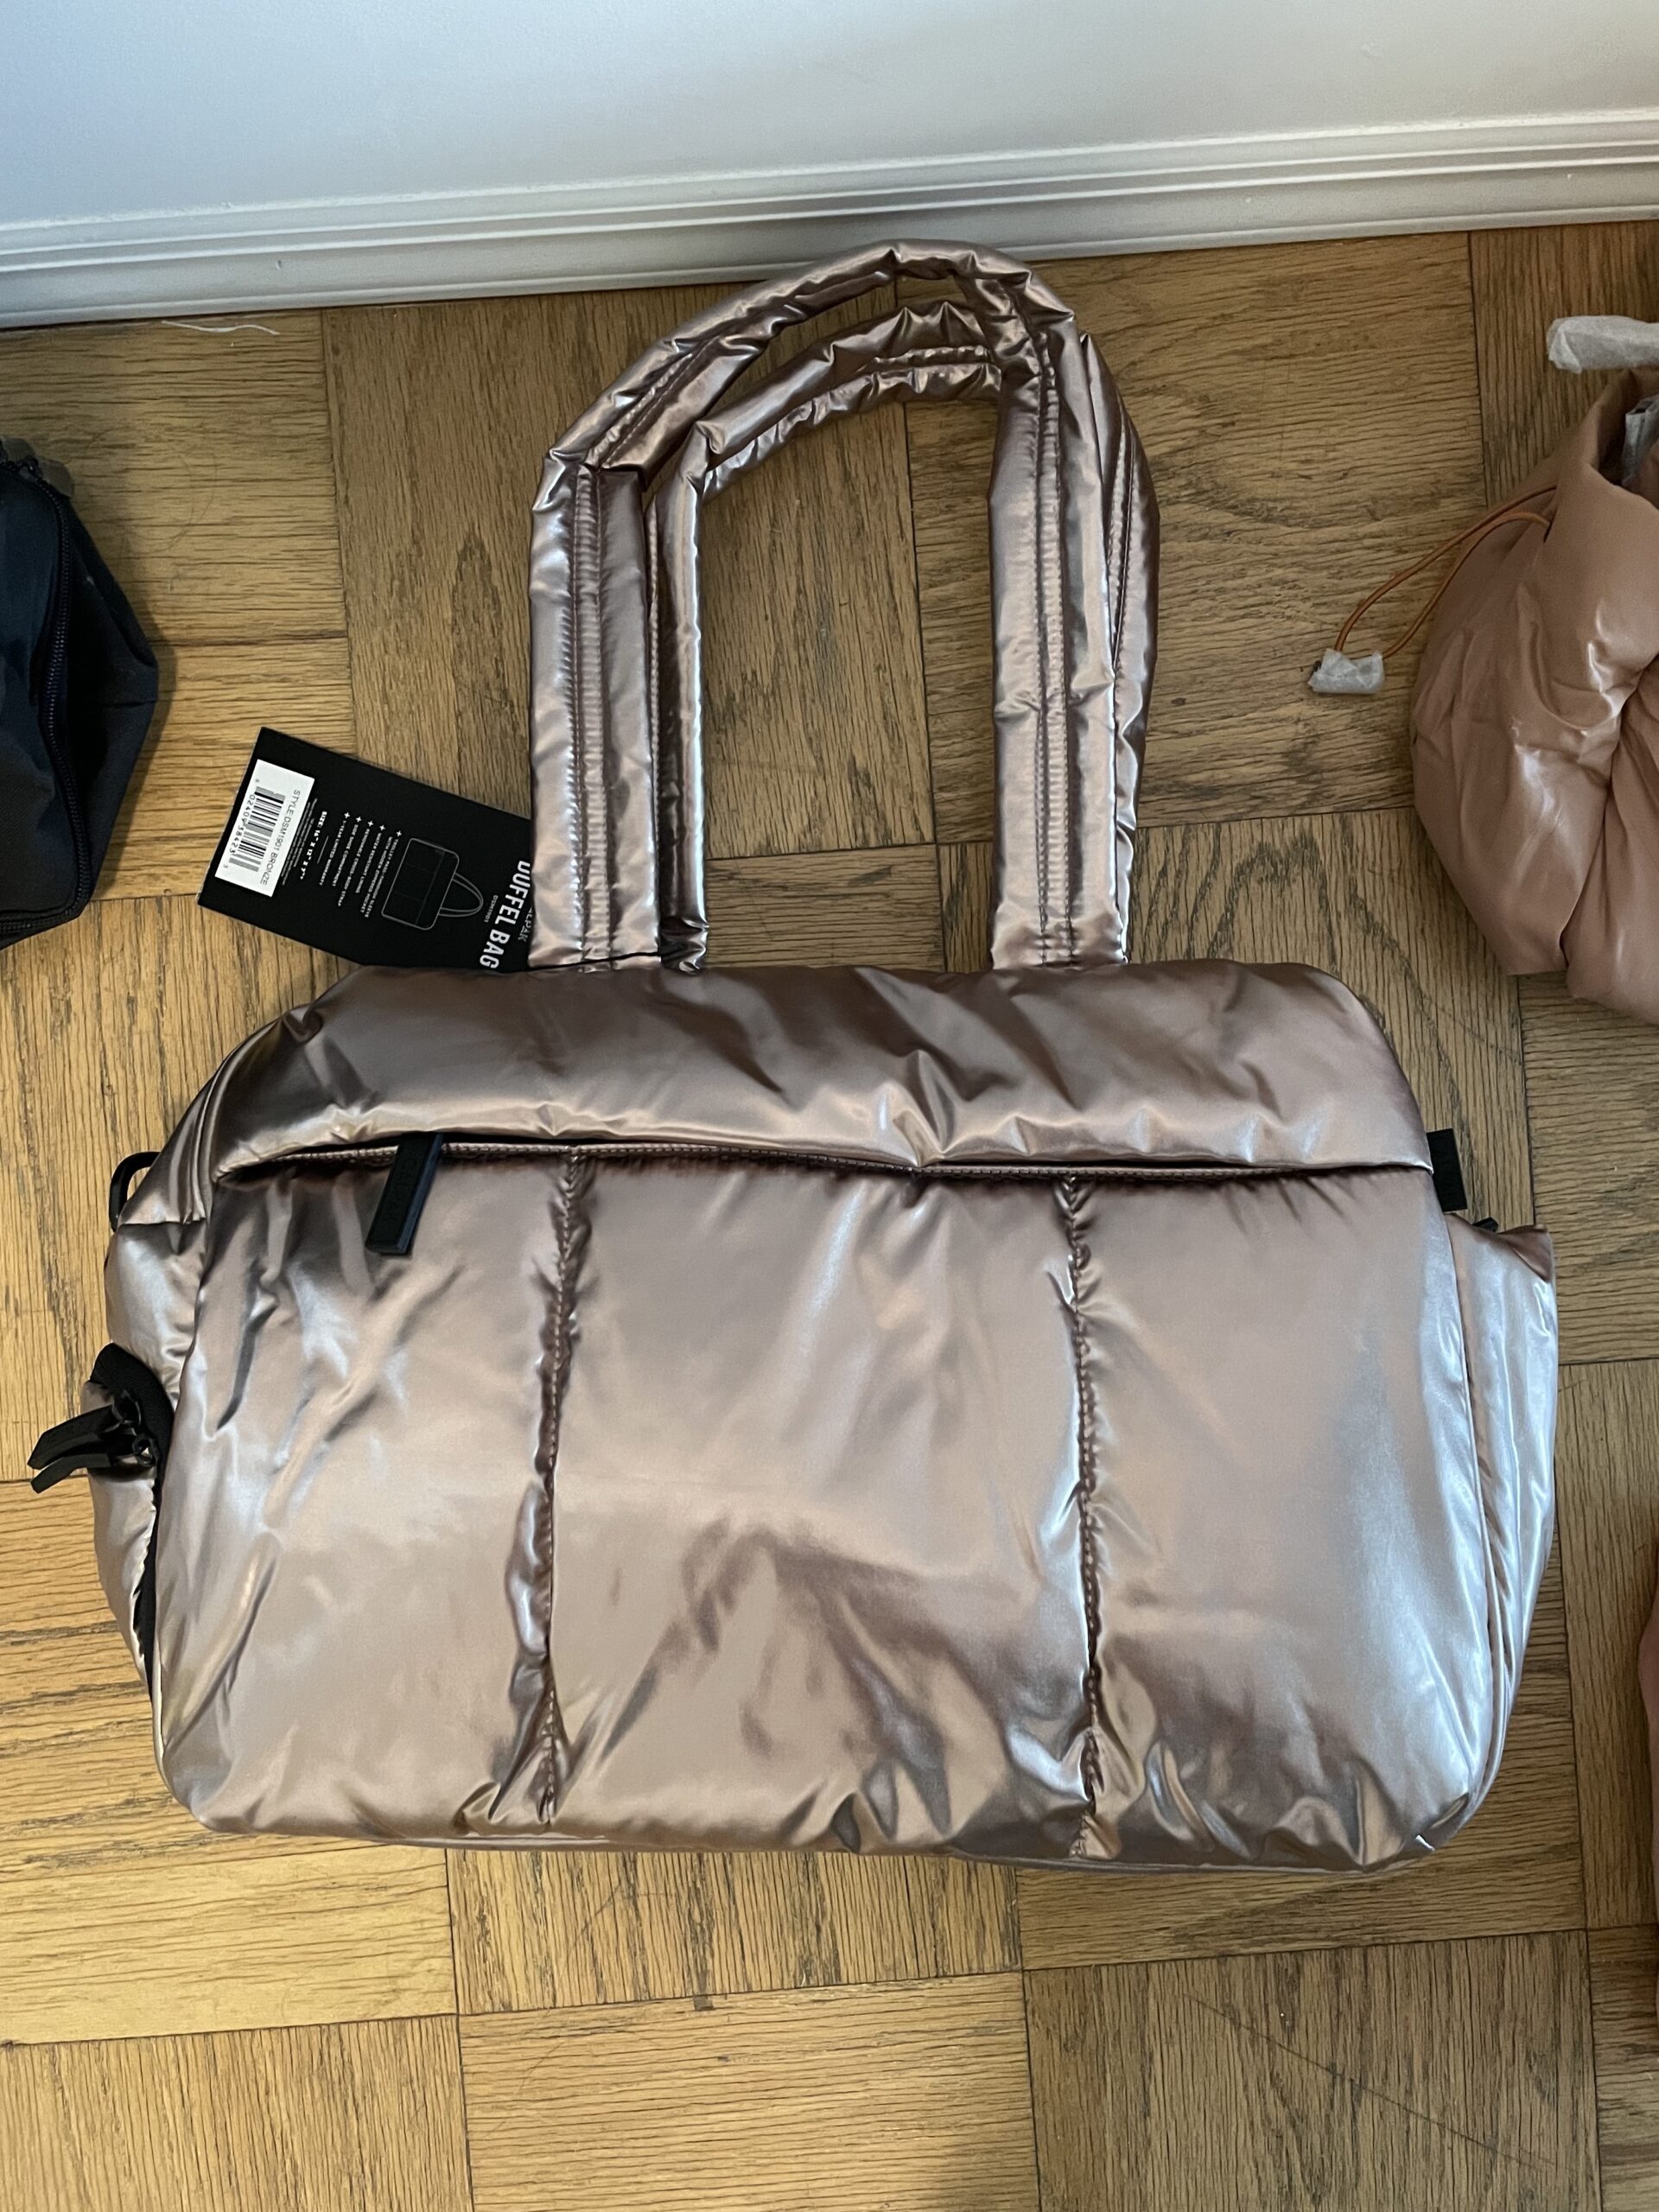 I tested if my Calpak luka duffel bag fits under the seat during